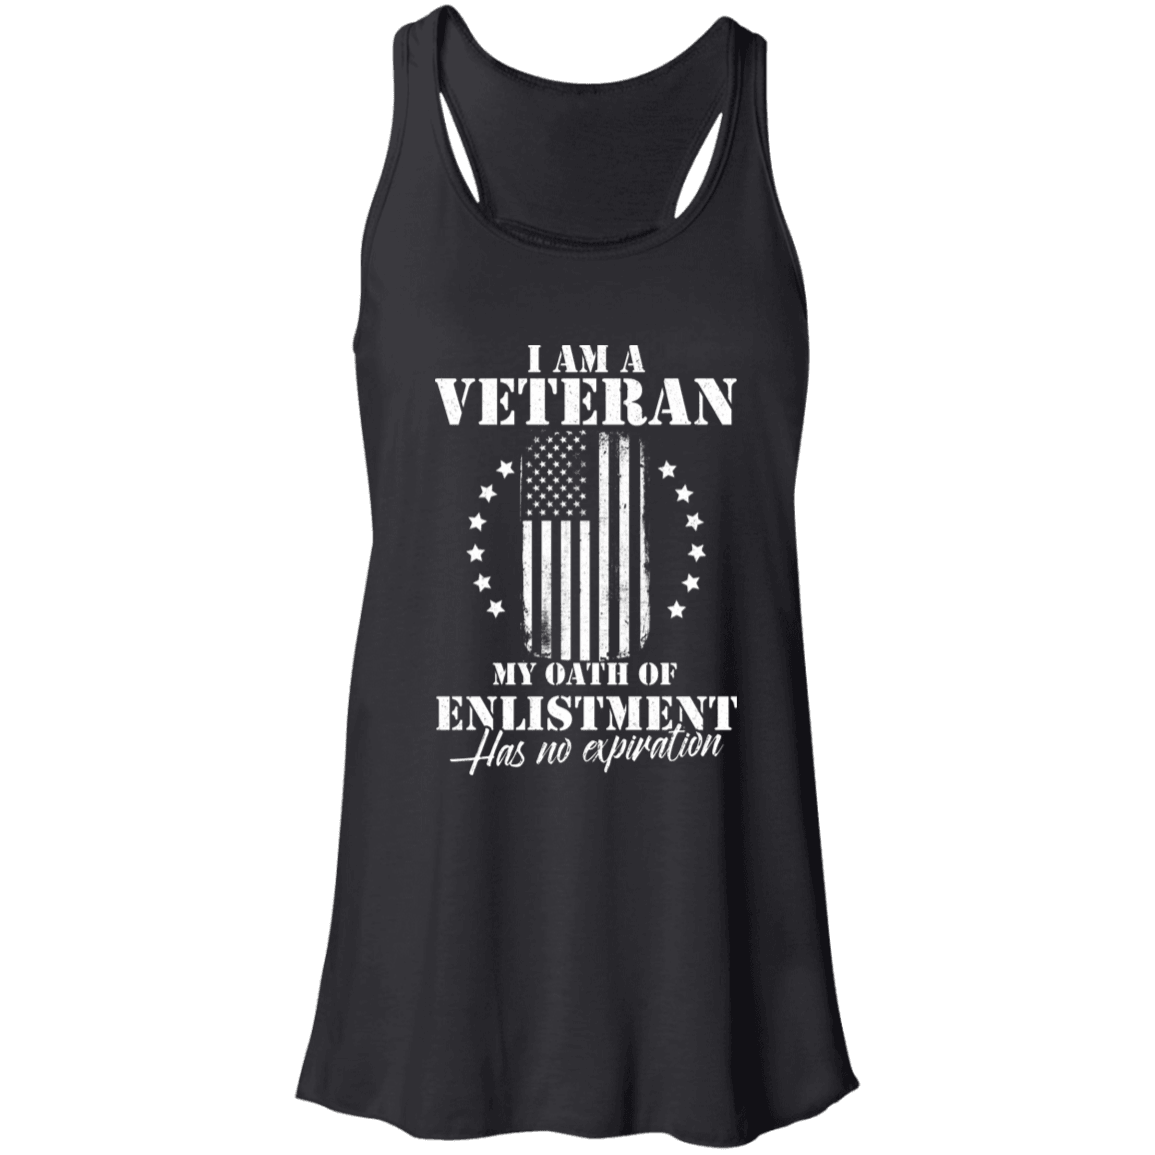 Designs by MyUtopia Shout Out:I Am A Veteran My Oath of Enlistment does not Expire Ladies Flowy Racerback Tank,X-Small / Black,Tank Tops